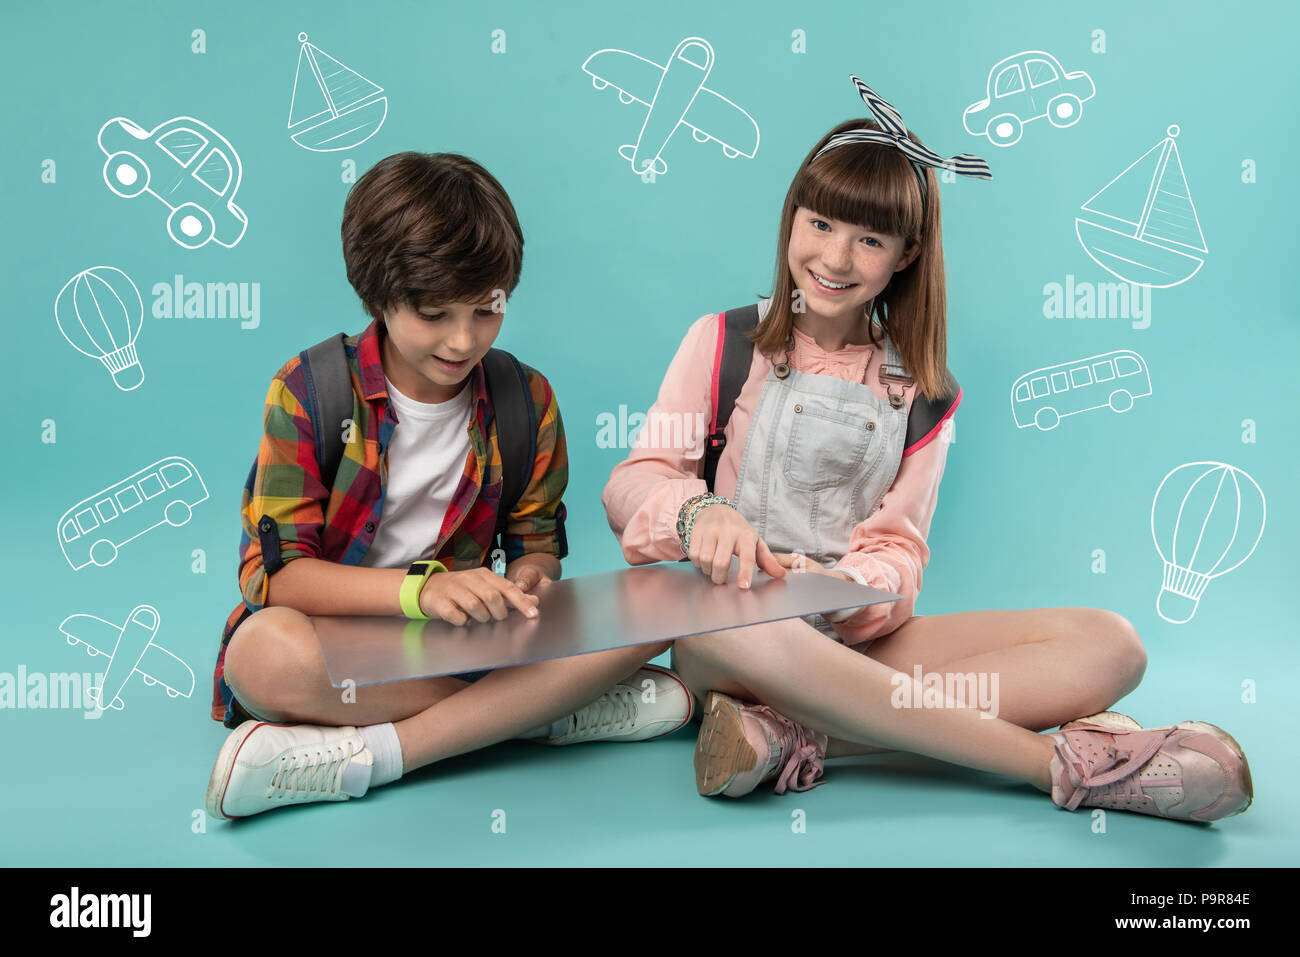 Happy kids sitting on the floor and using a transparent device Stock Photo